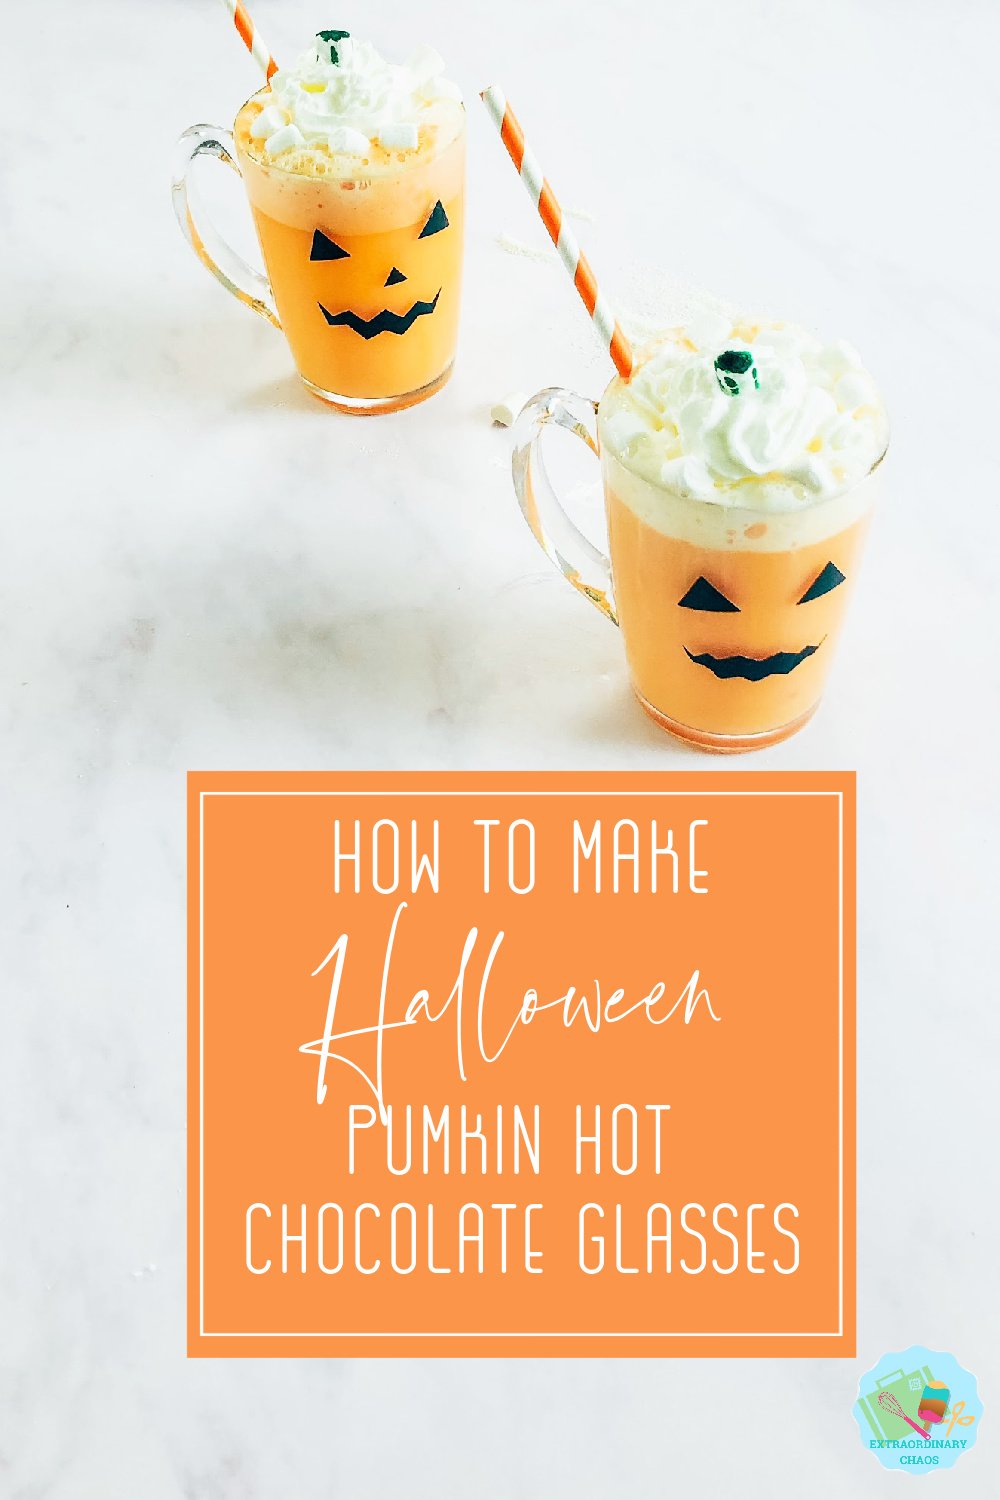 Halloween pumpkin hot chocolate glasses and orange hot chocolate for Halloween parties and trick or treating